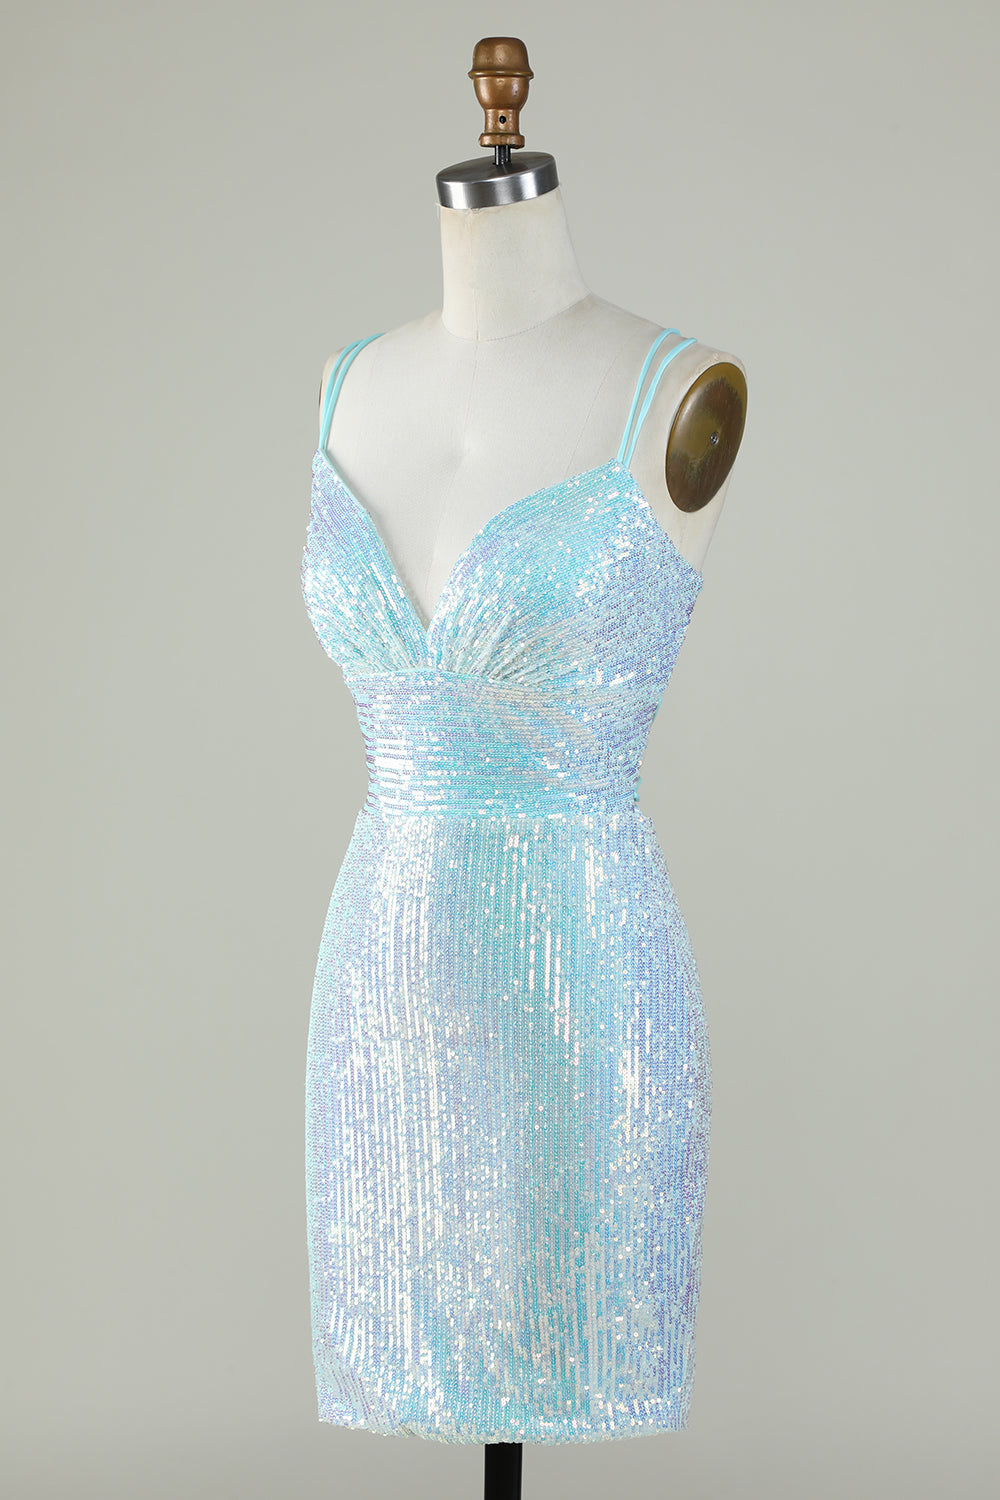 Bling Sheath Spaghetti Straps Light Blue Sequins Short Homecoming Dress with Criss Cross Back